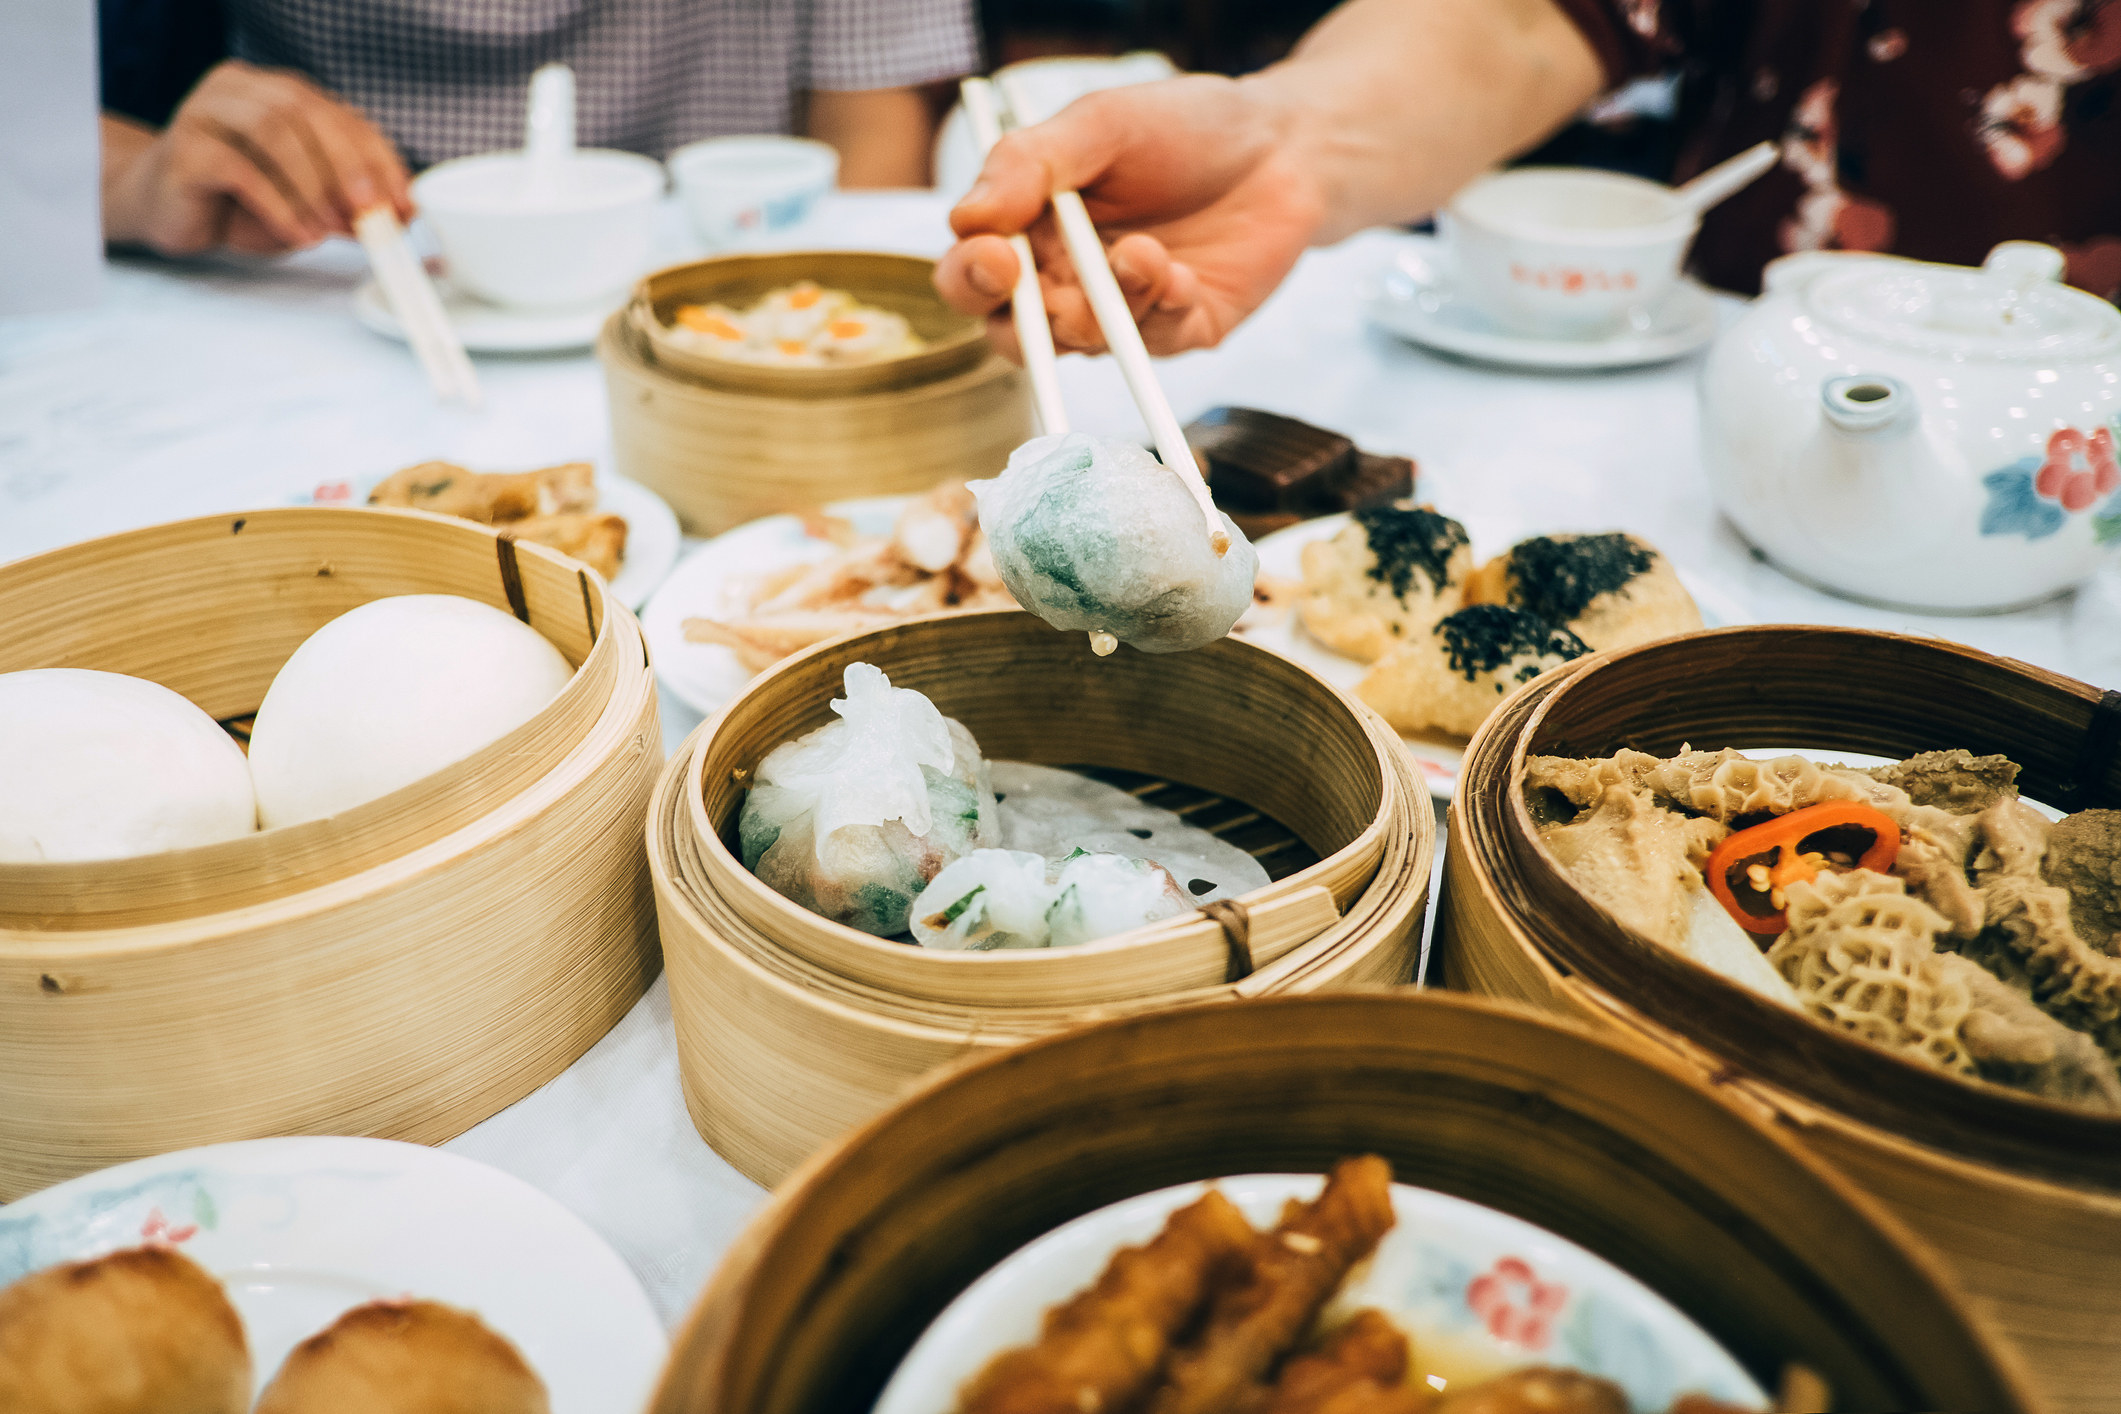 A group of people eating a dim sum meal